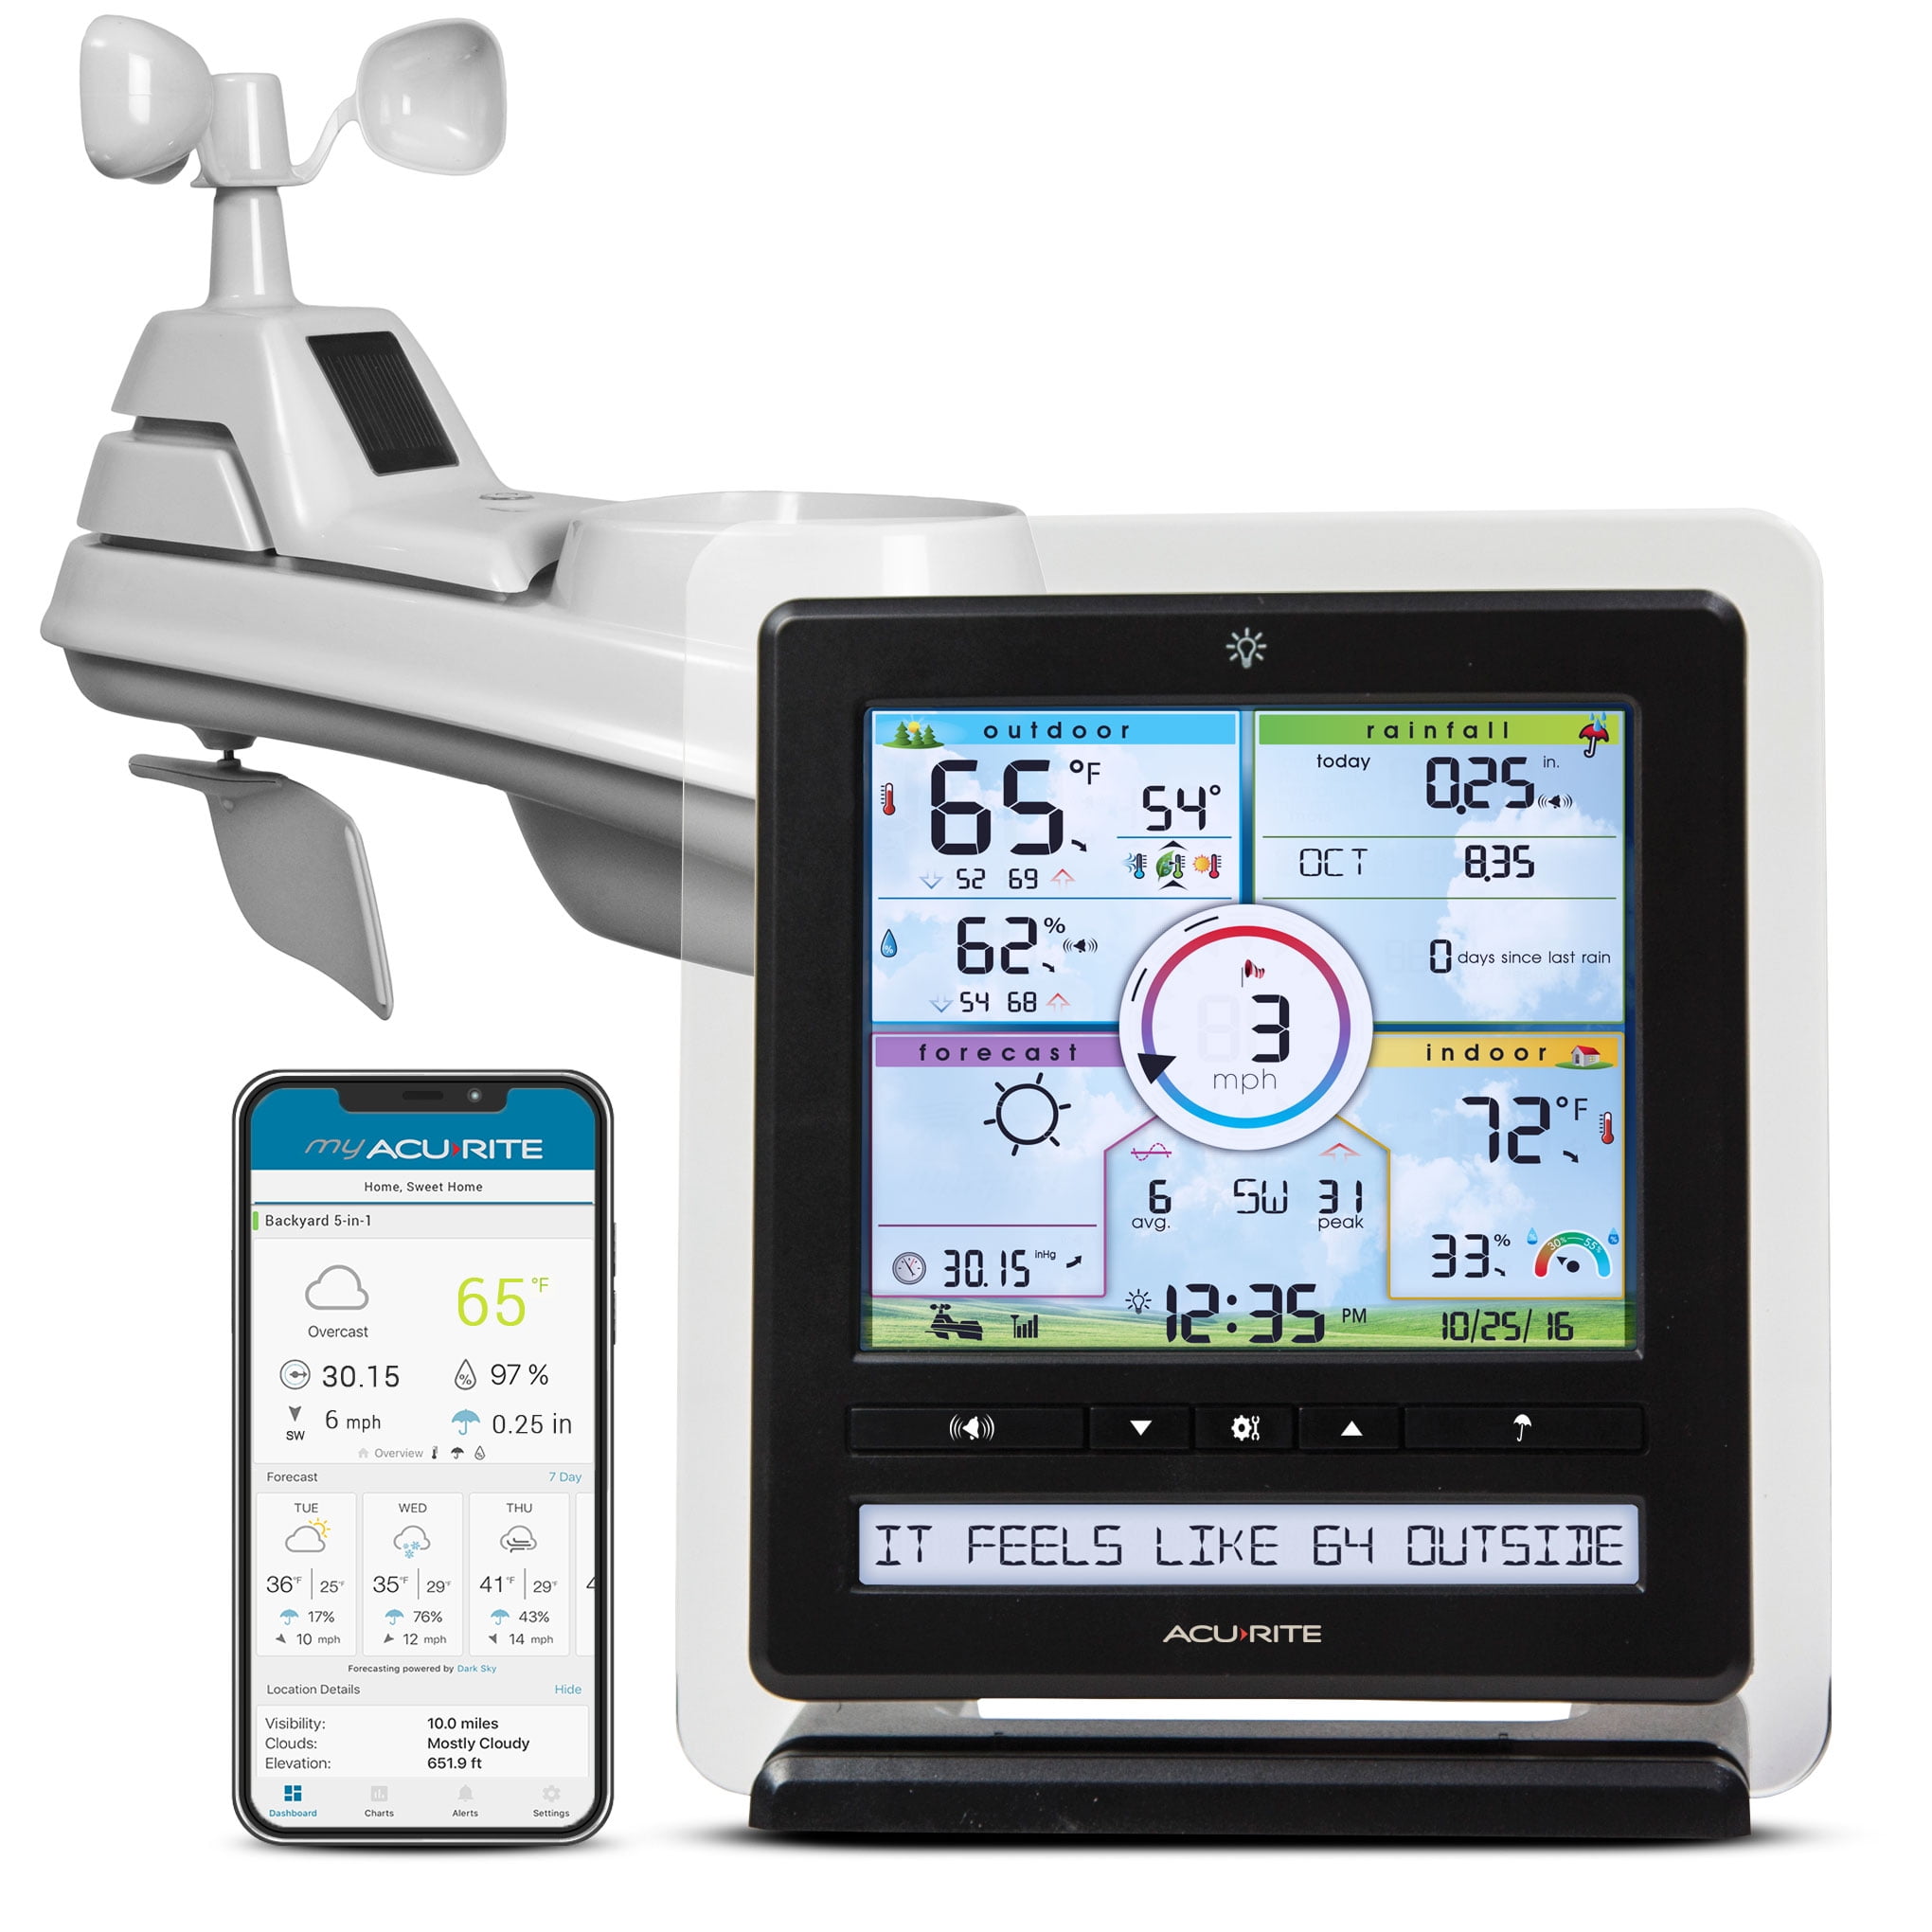 AcuRite Digital Weather Forecaster with Indoor/Outdoor Temperature and  Indoor Humidity White/Black 00506W - Best Buy